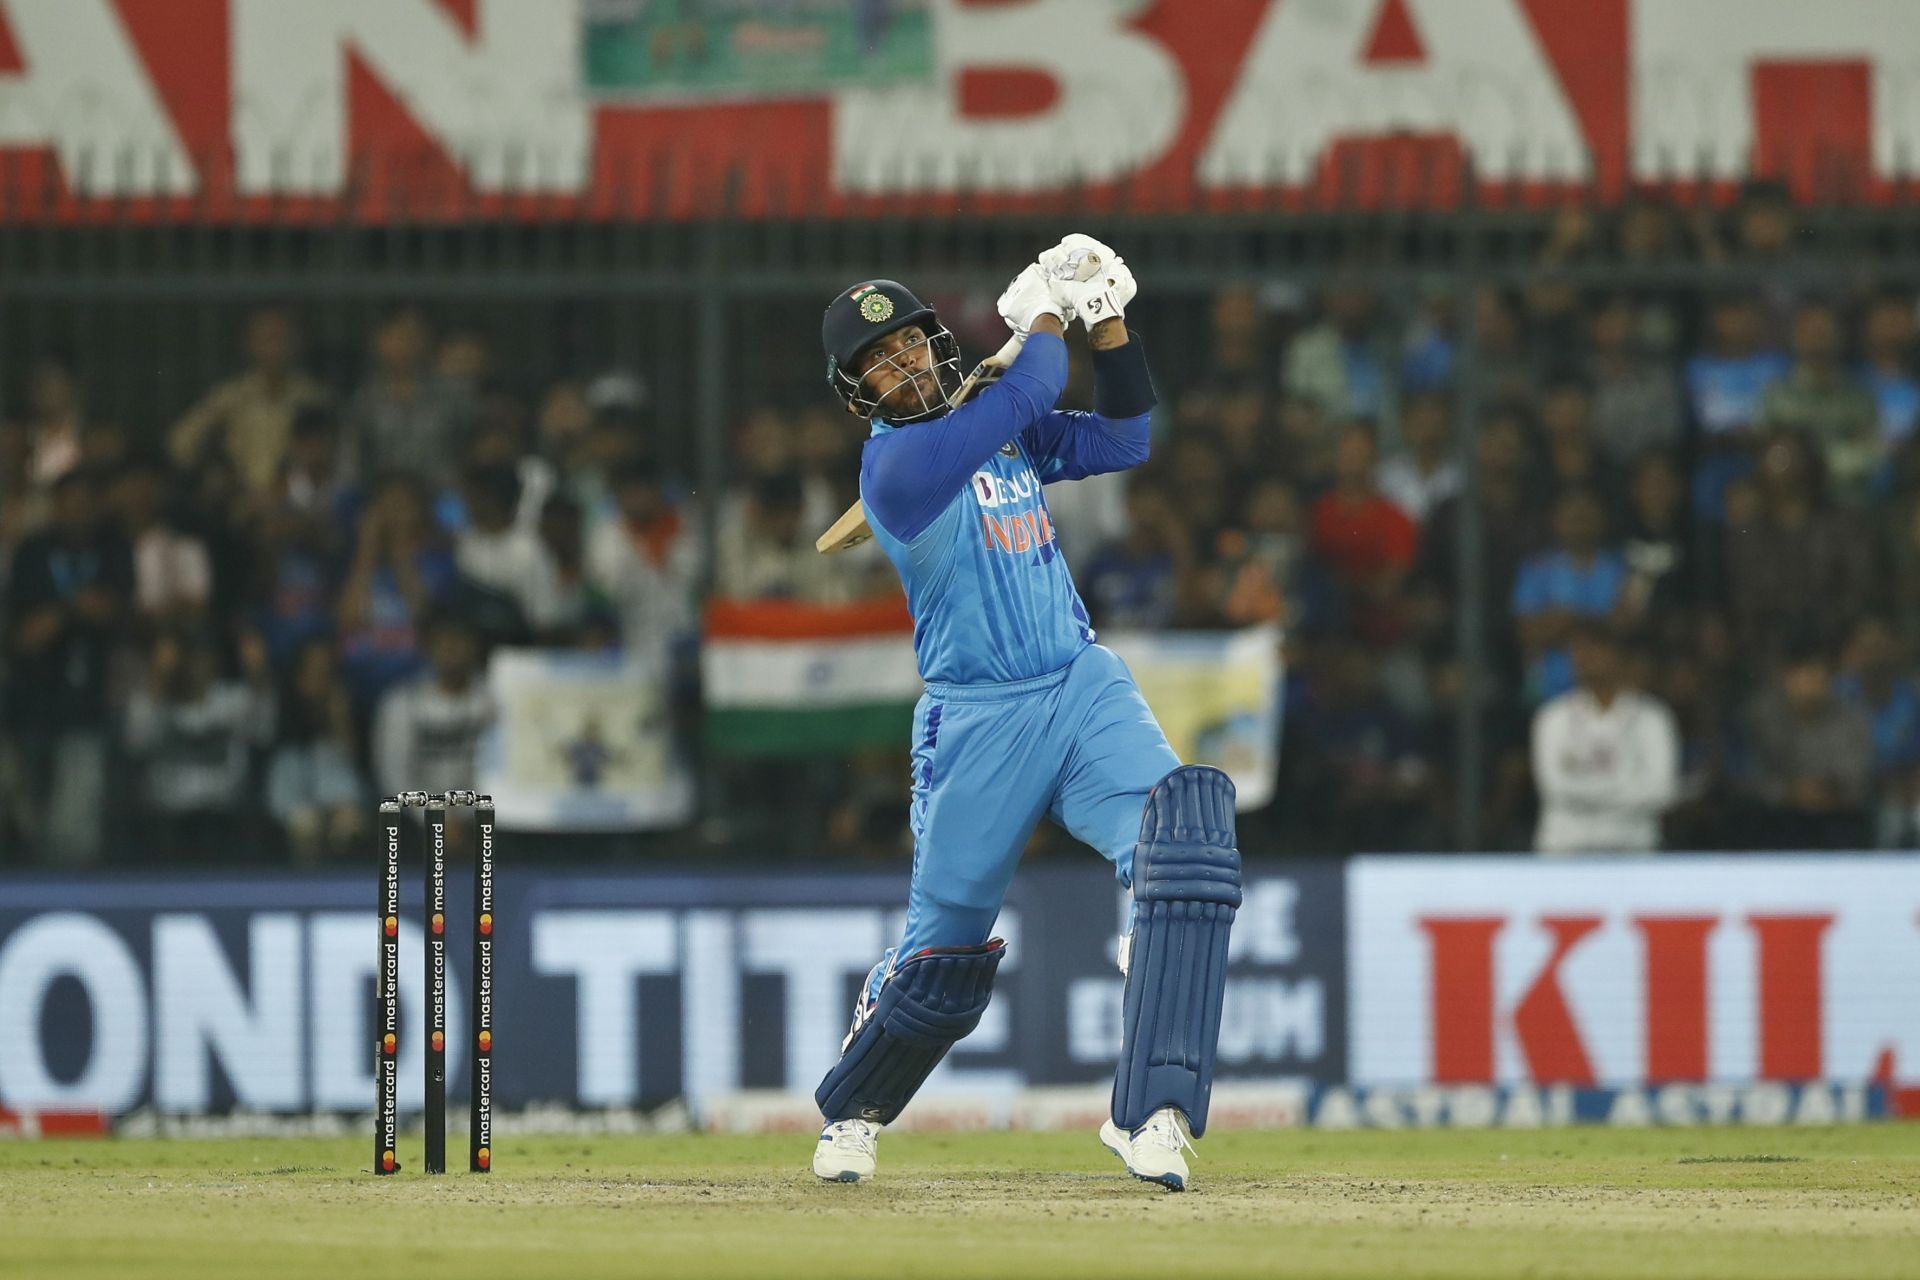 3rd T20 International: India v South Africa (Image: Getty)